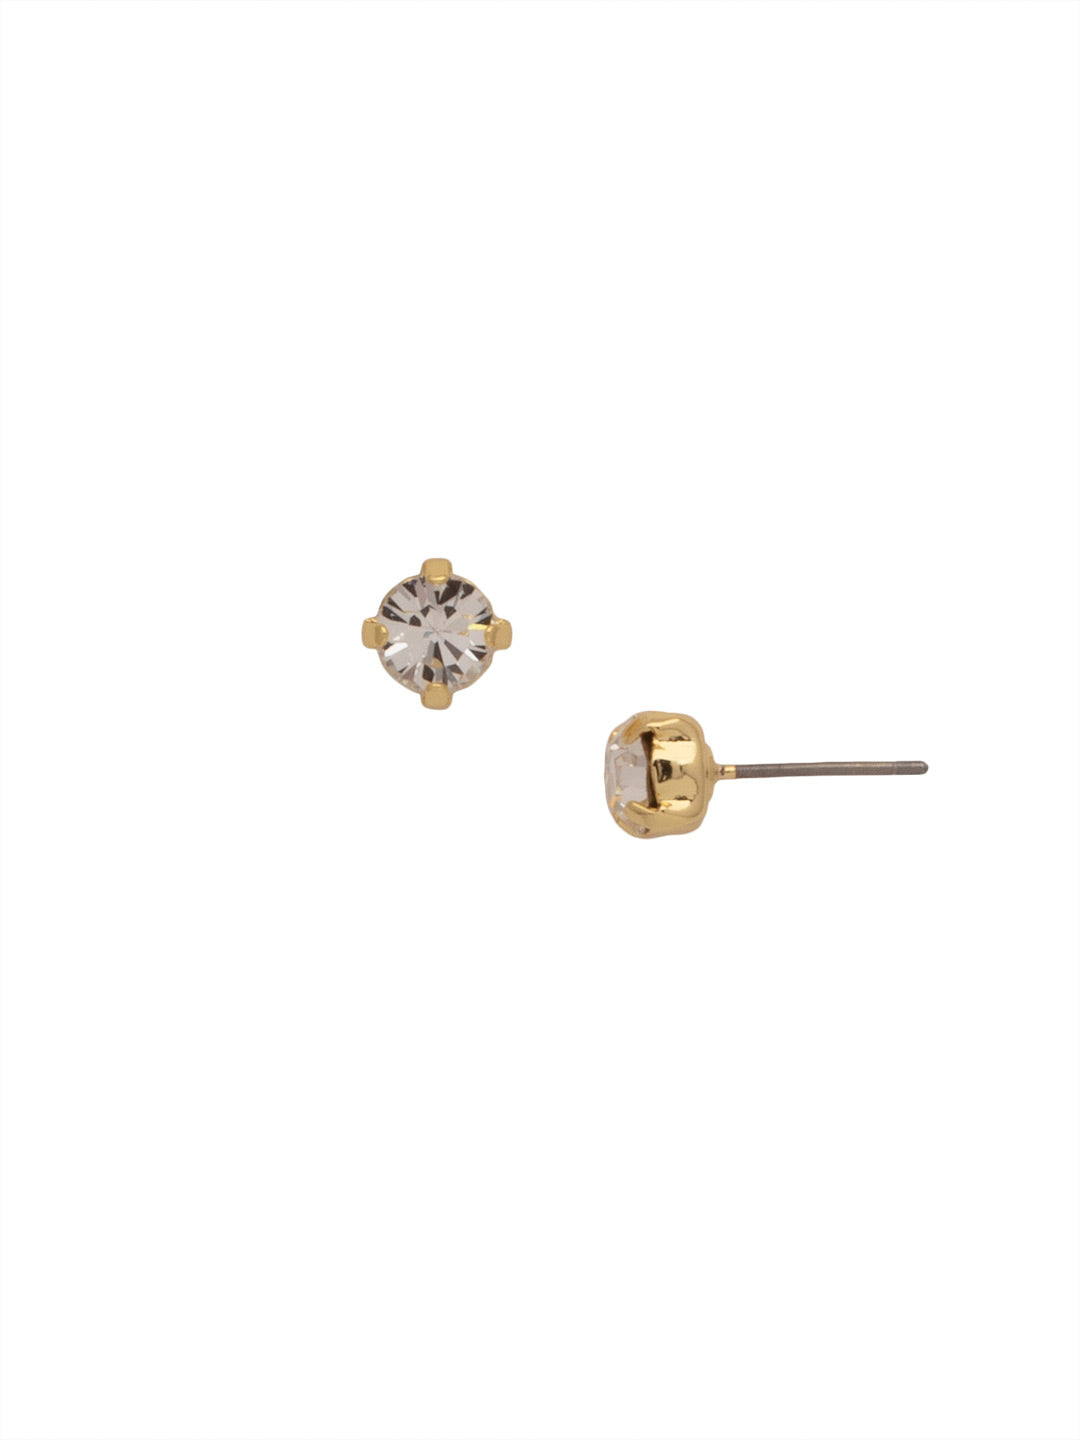 Jayda Stud Earrings - EDN32BGCRY - <p>The Jayda Stud Earrings are the perfect every day wardrobe staple. A round crystal nestles perfectly in a metal plated post with four prongs. </p><p>Need help picking a stud? <a href="https://www.sorrelli.com/blogs/sisterhood/round-stud-earrings-101-a-rundown-of-sizes-styles-and-sparkle">Check out our size guide!</a> From Sorrelli's Crystal collection in our Bright Gold-tone finish.</p>